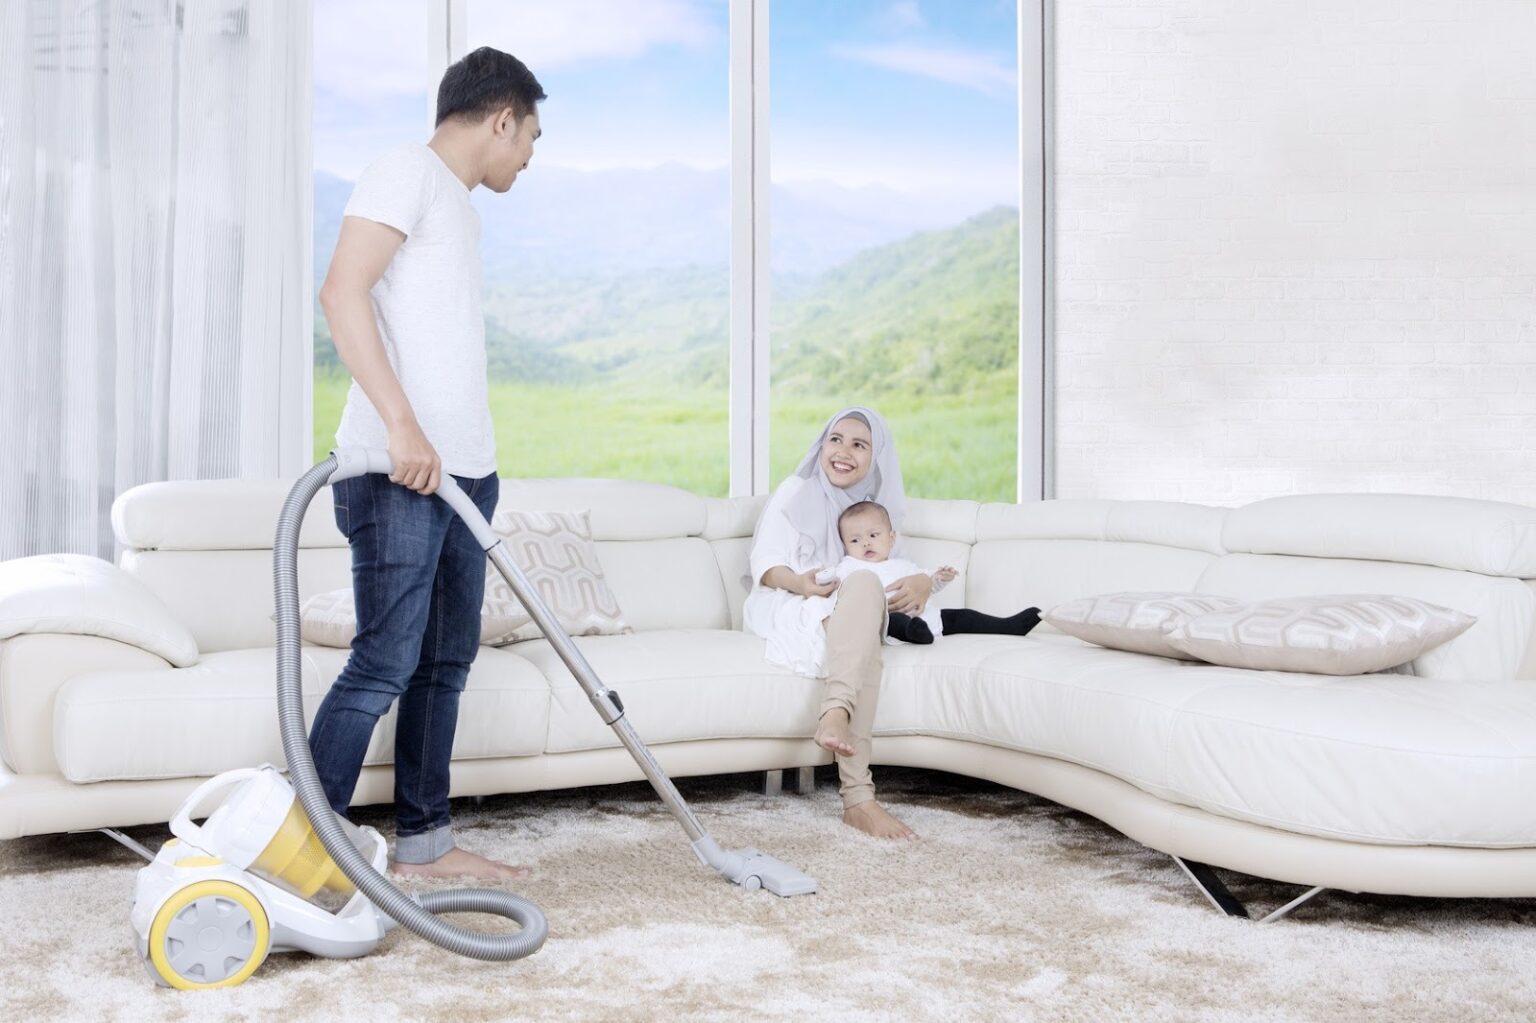 7 Signs It’s Time to Call a Carpet Cleaning Service